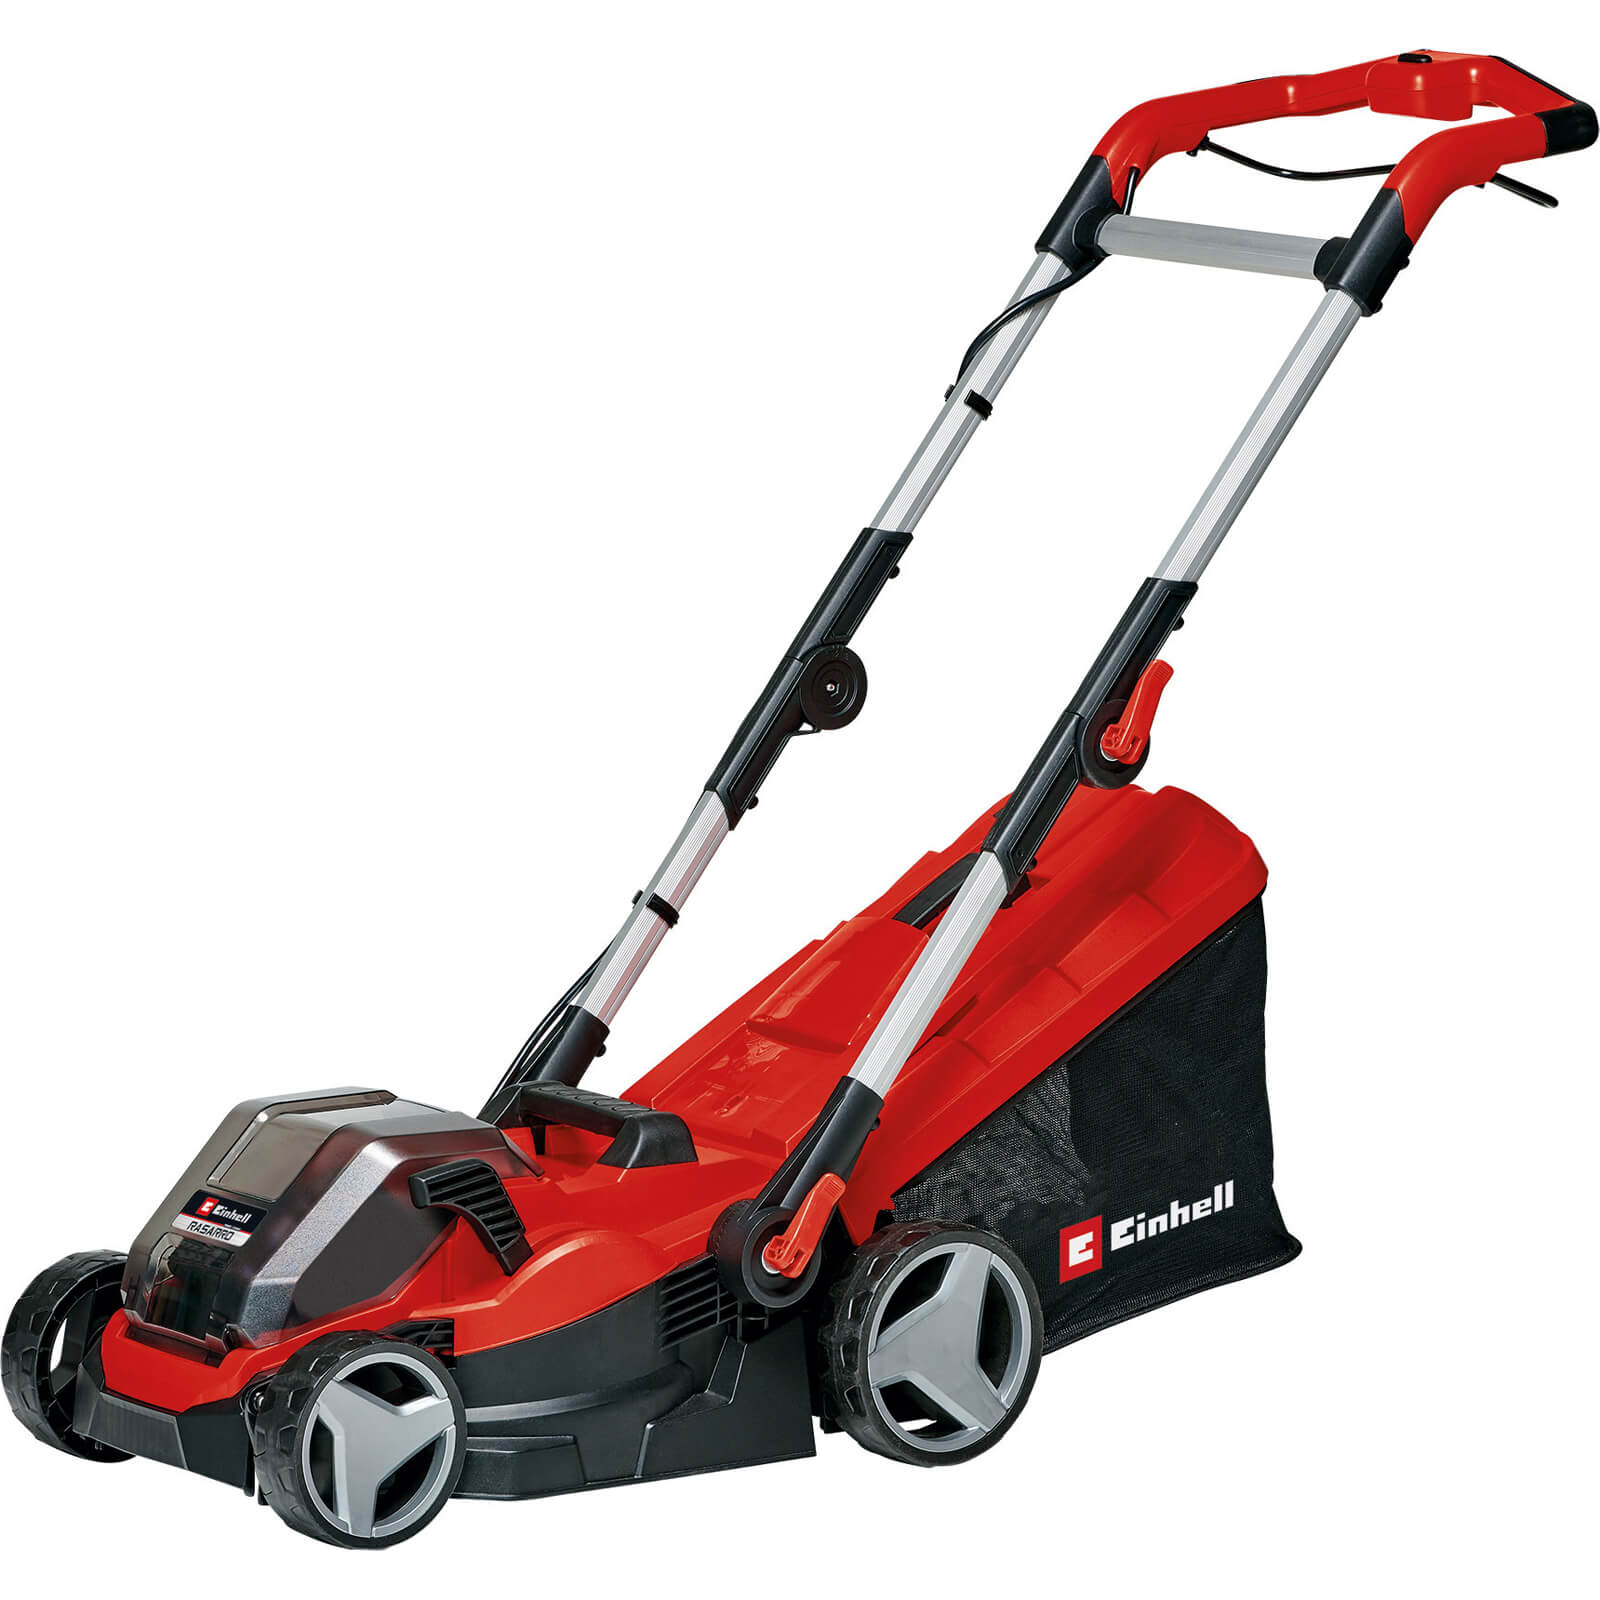 Image of Einhell RASARRO 36/34 36v Cordless Rotary Lawnmower 340mm No Batteries No Charger